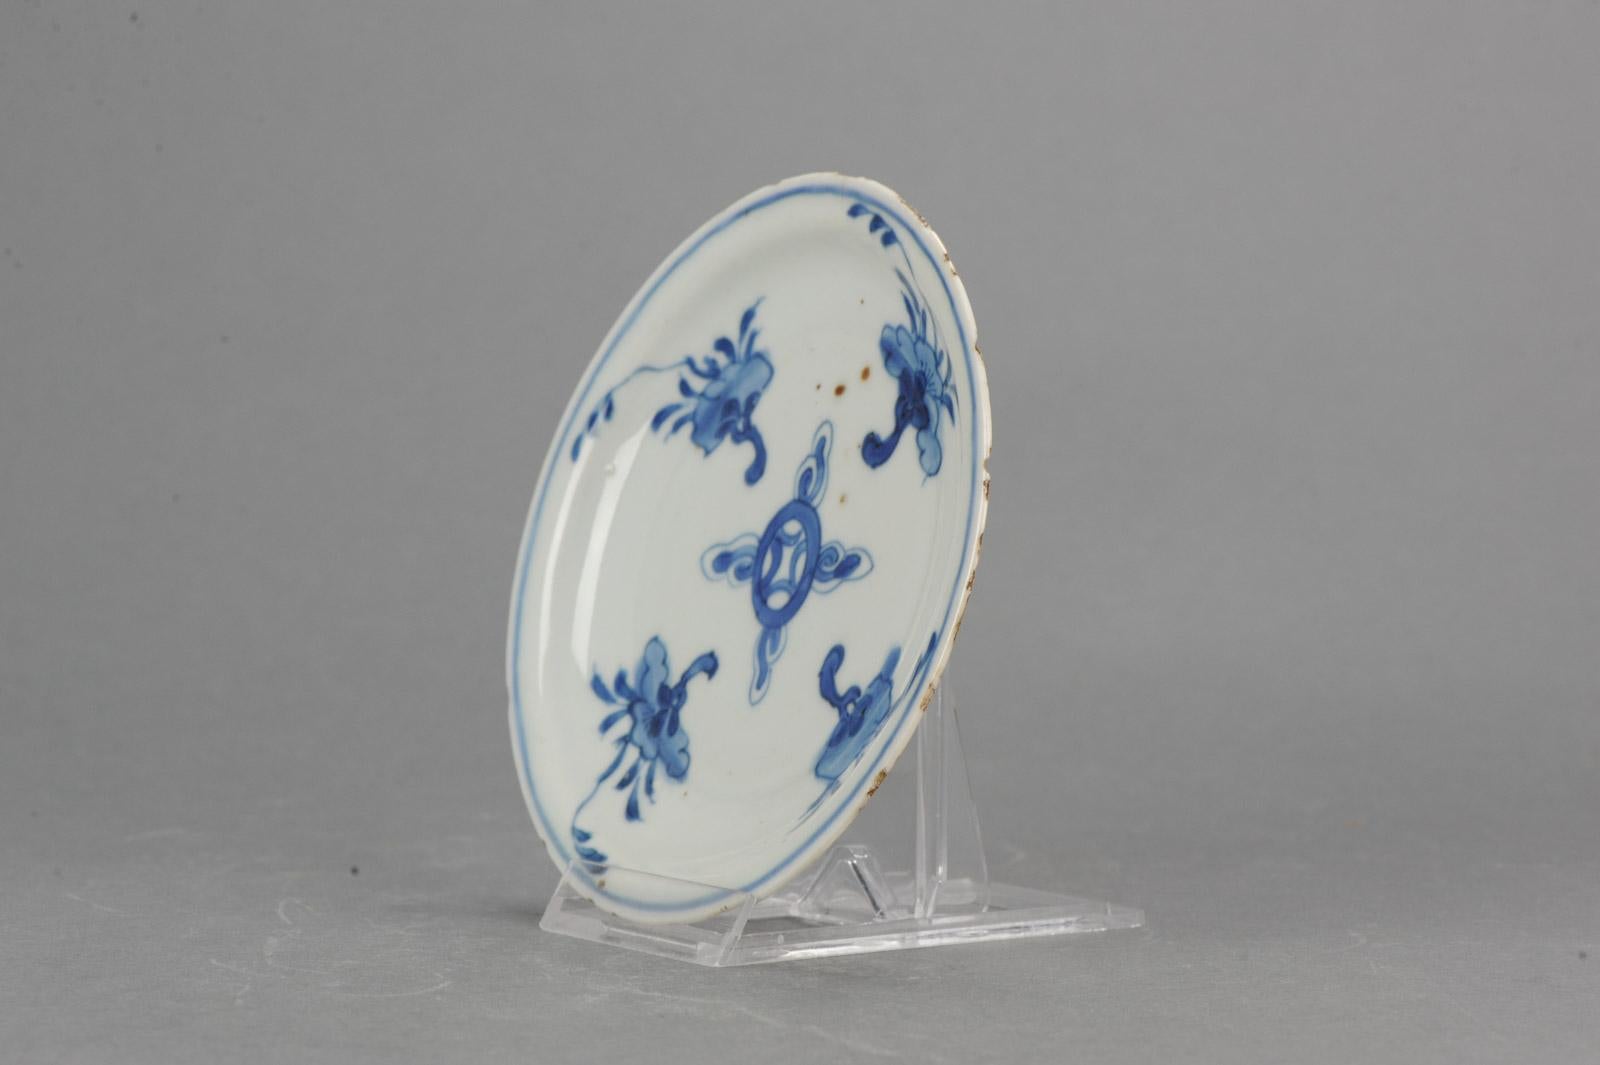 A very nicely decorated plate with a scene of an ancient coin and flowers. Late Ming.

Additional information:
Material: Porcelain & Pottery
Type: Plates
Region of Origin: China
Country of Manufacturing: China
Period: 16th century, 17th century Ming